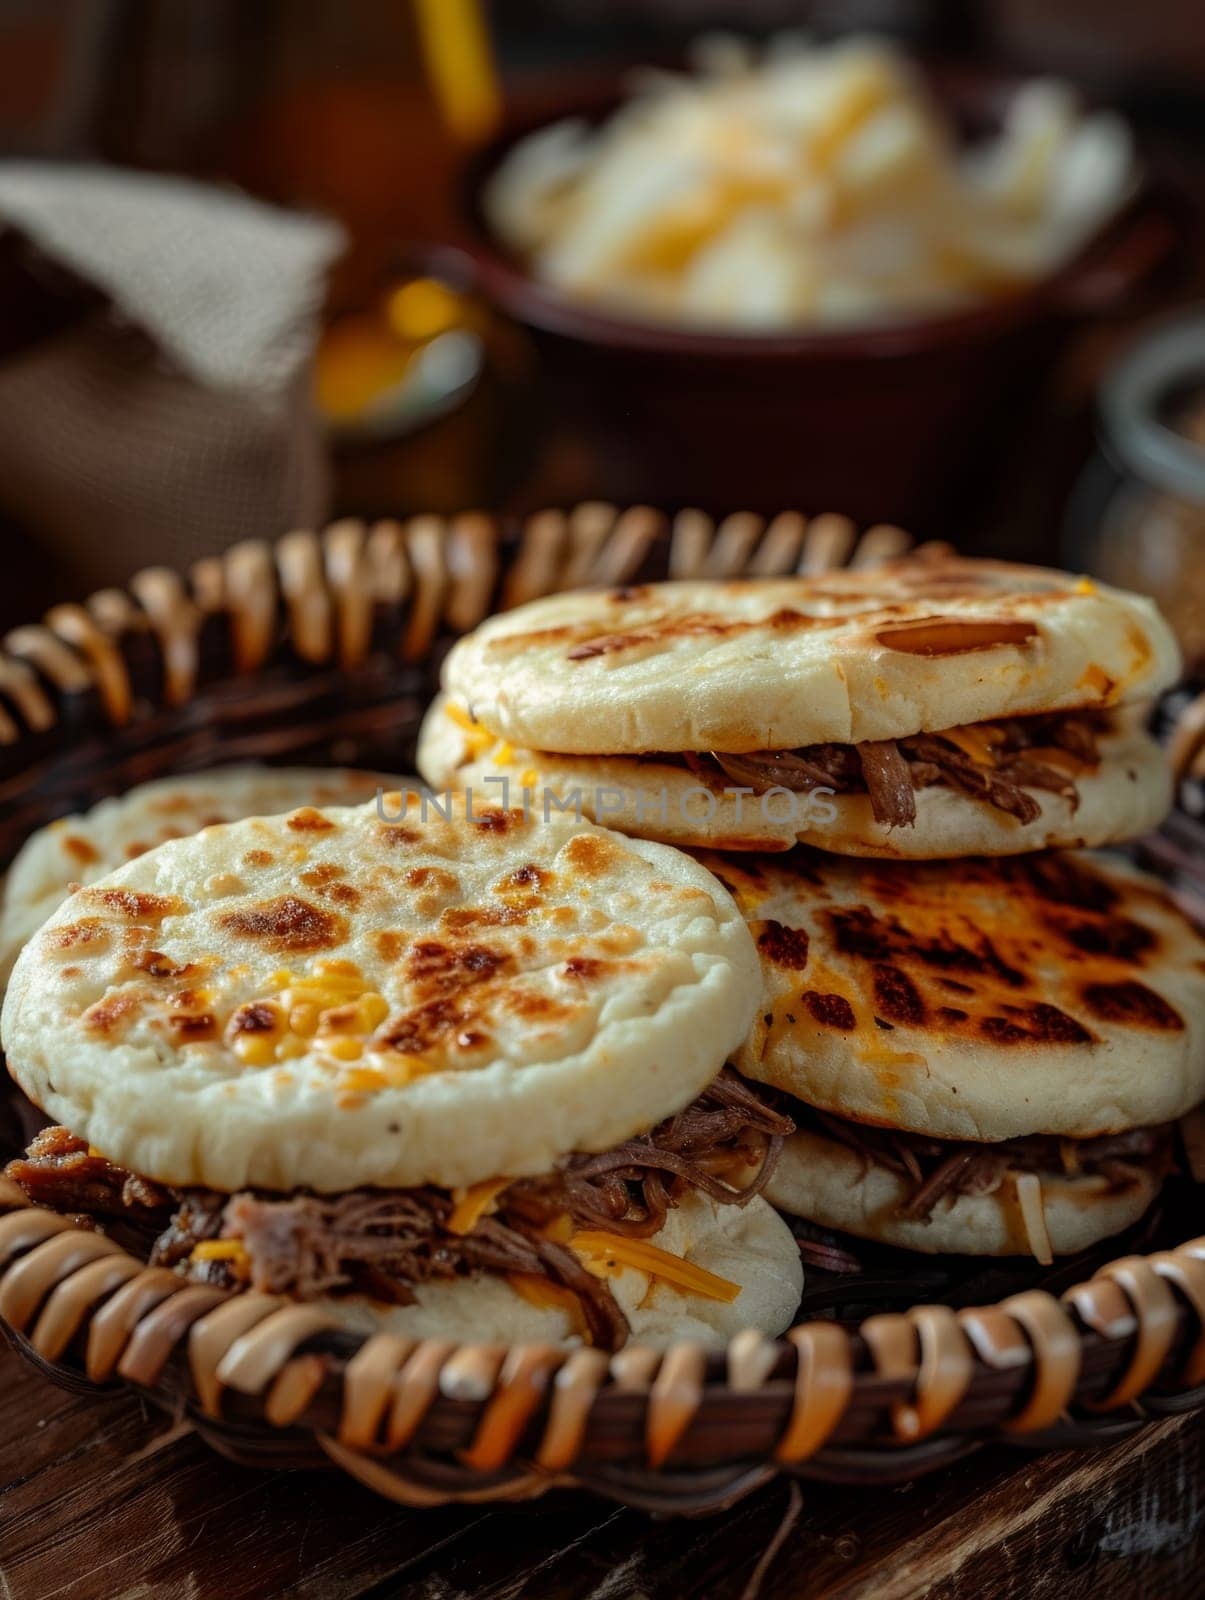 Authentic Venezuelan arepas, freshly made cornmeal cakes stuffed with a variety of savory fillings like cheese, pulled pork, or beans, presented in a woven basket. by sfinks